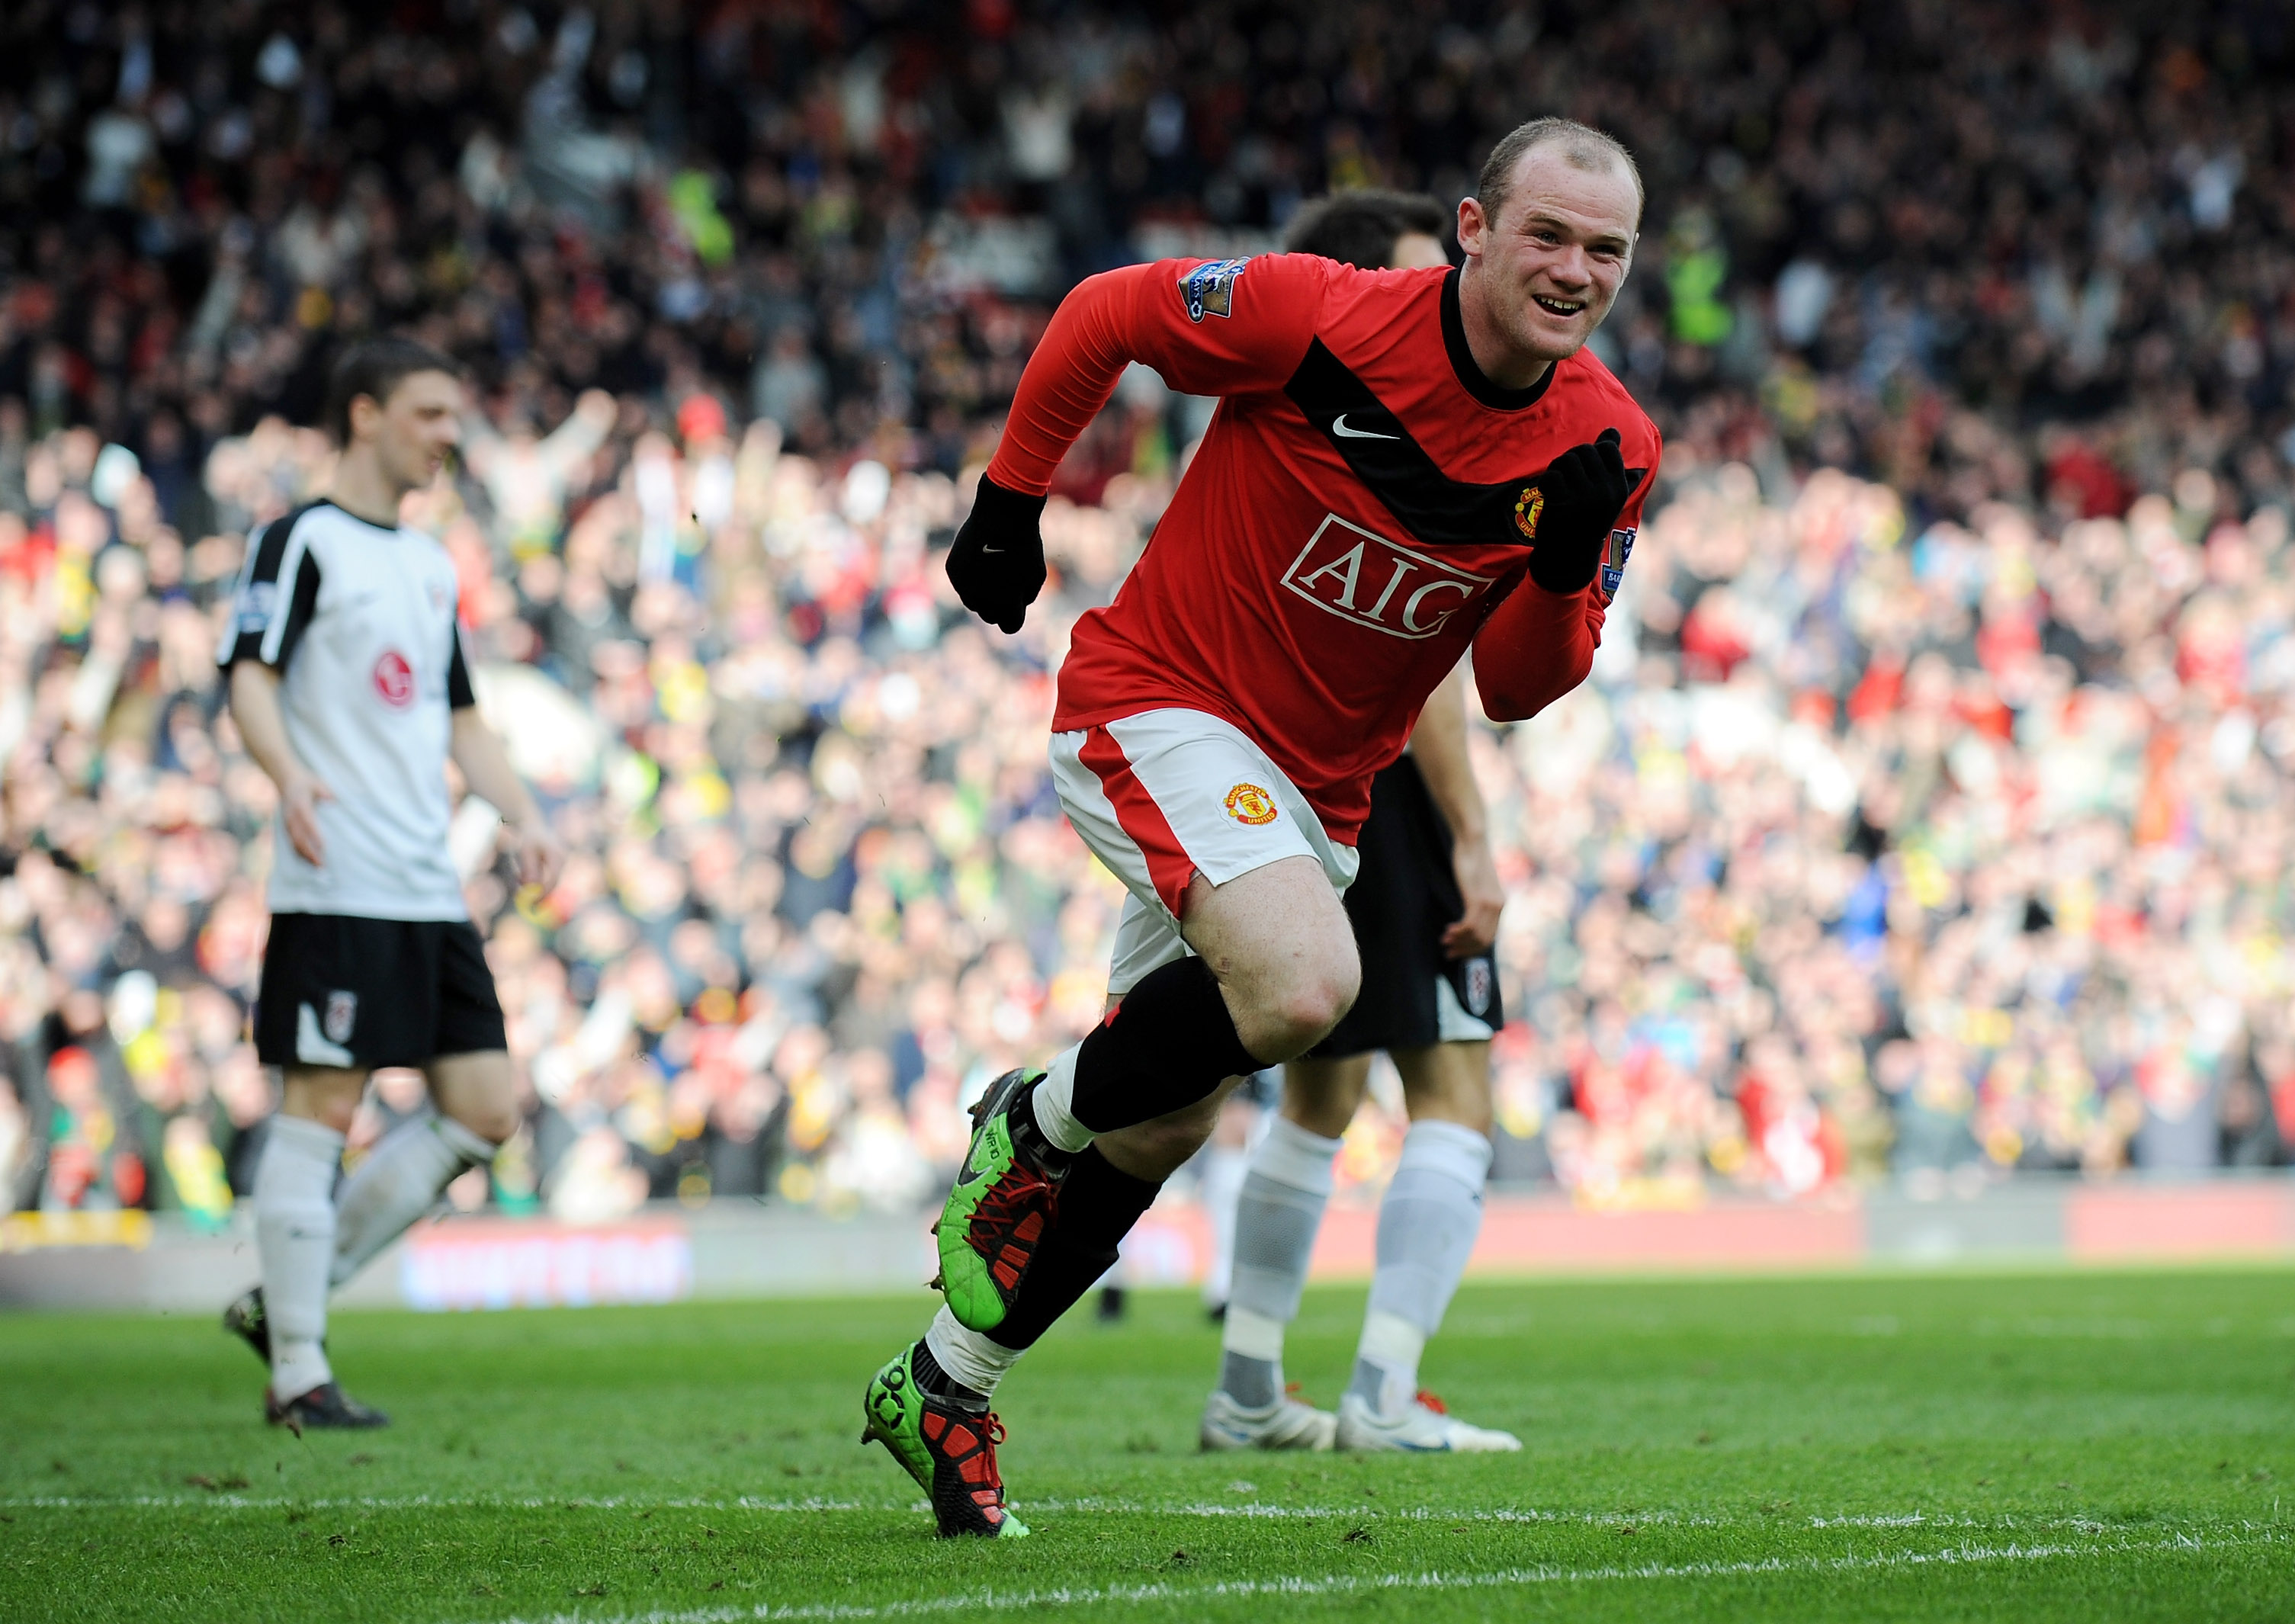 MANCHESTER, ENGLAND - MARCH 14:  Wayne Rooney of Manchester United celebrates scoring the first goal during the Barclays Premier League match between Manchester United and Fulham at Old Trafford on March 14, 2010 in Manchester, England.  (Photo by Michael